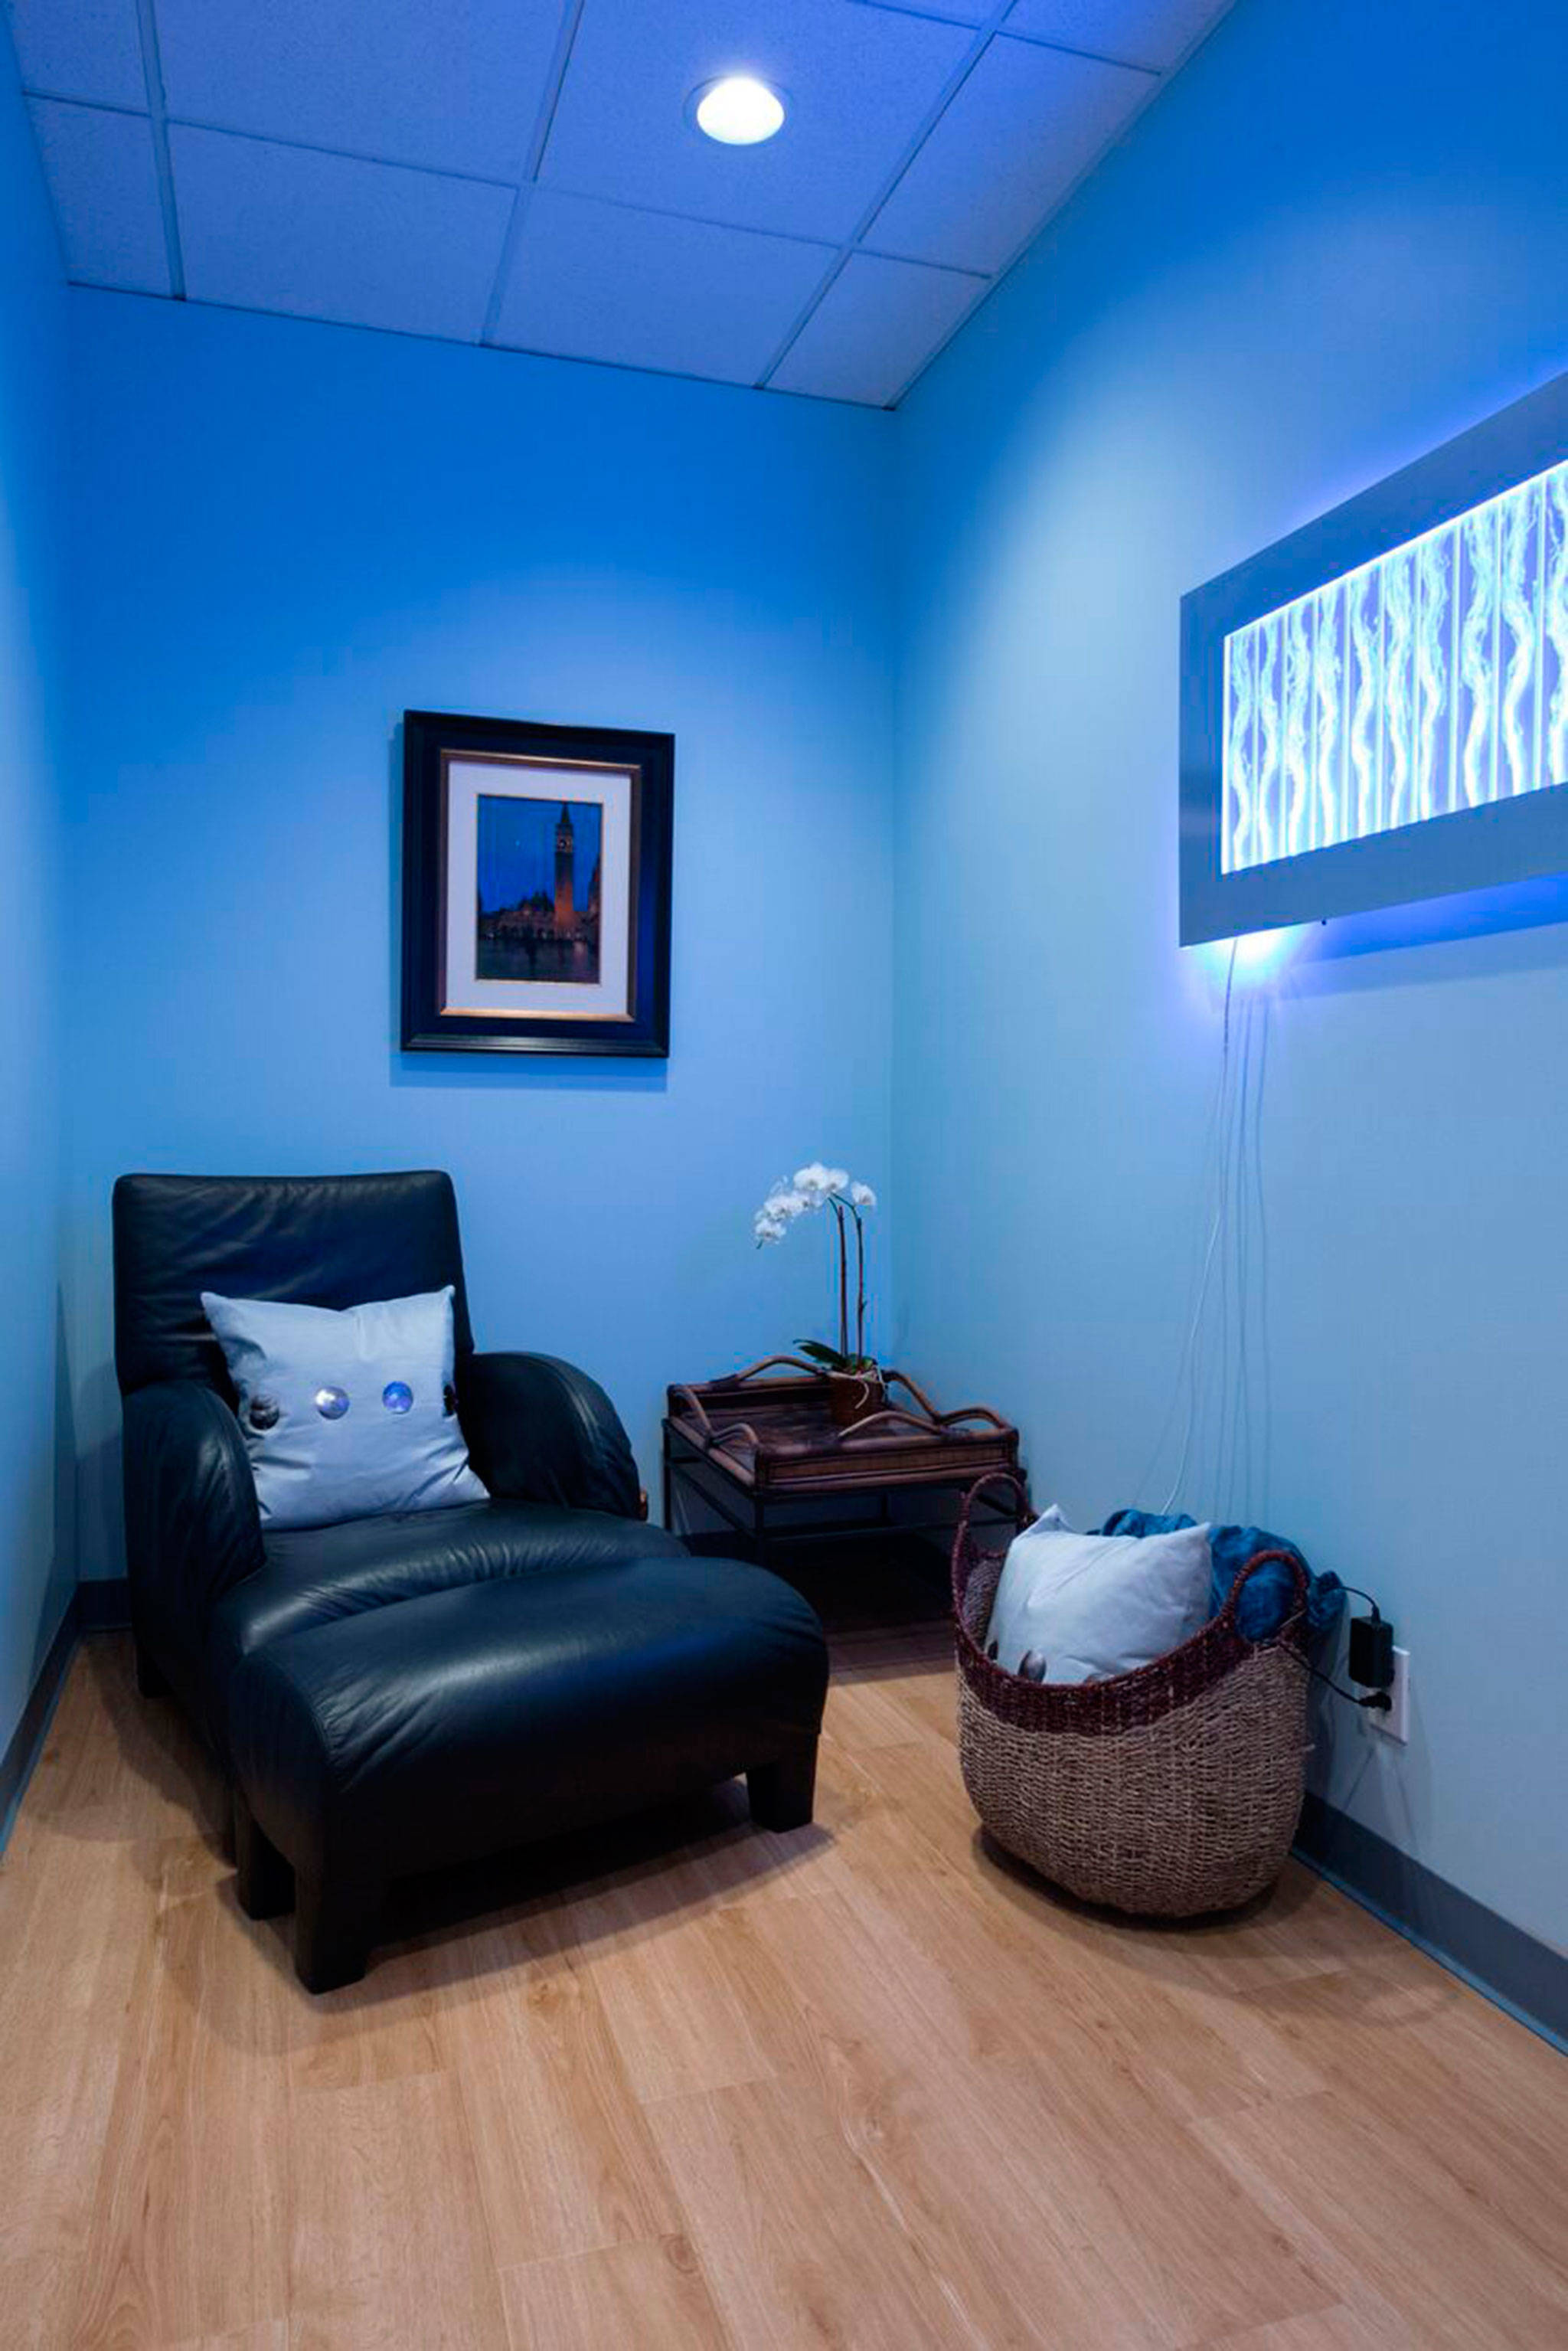 The spa also features cool down rooms for recovering and reflecting after sessions in the “Blu Room.” Photo courtesy of Susan Janus